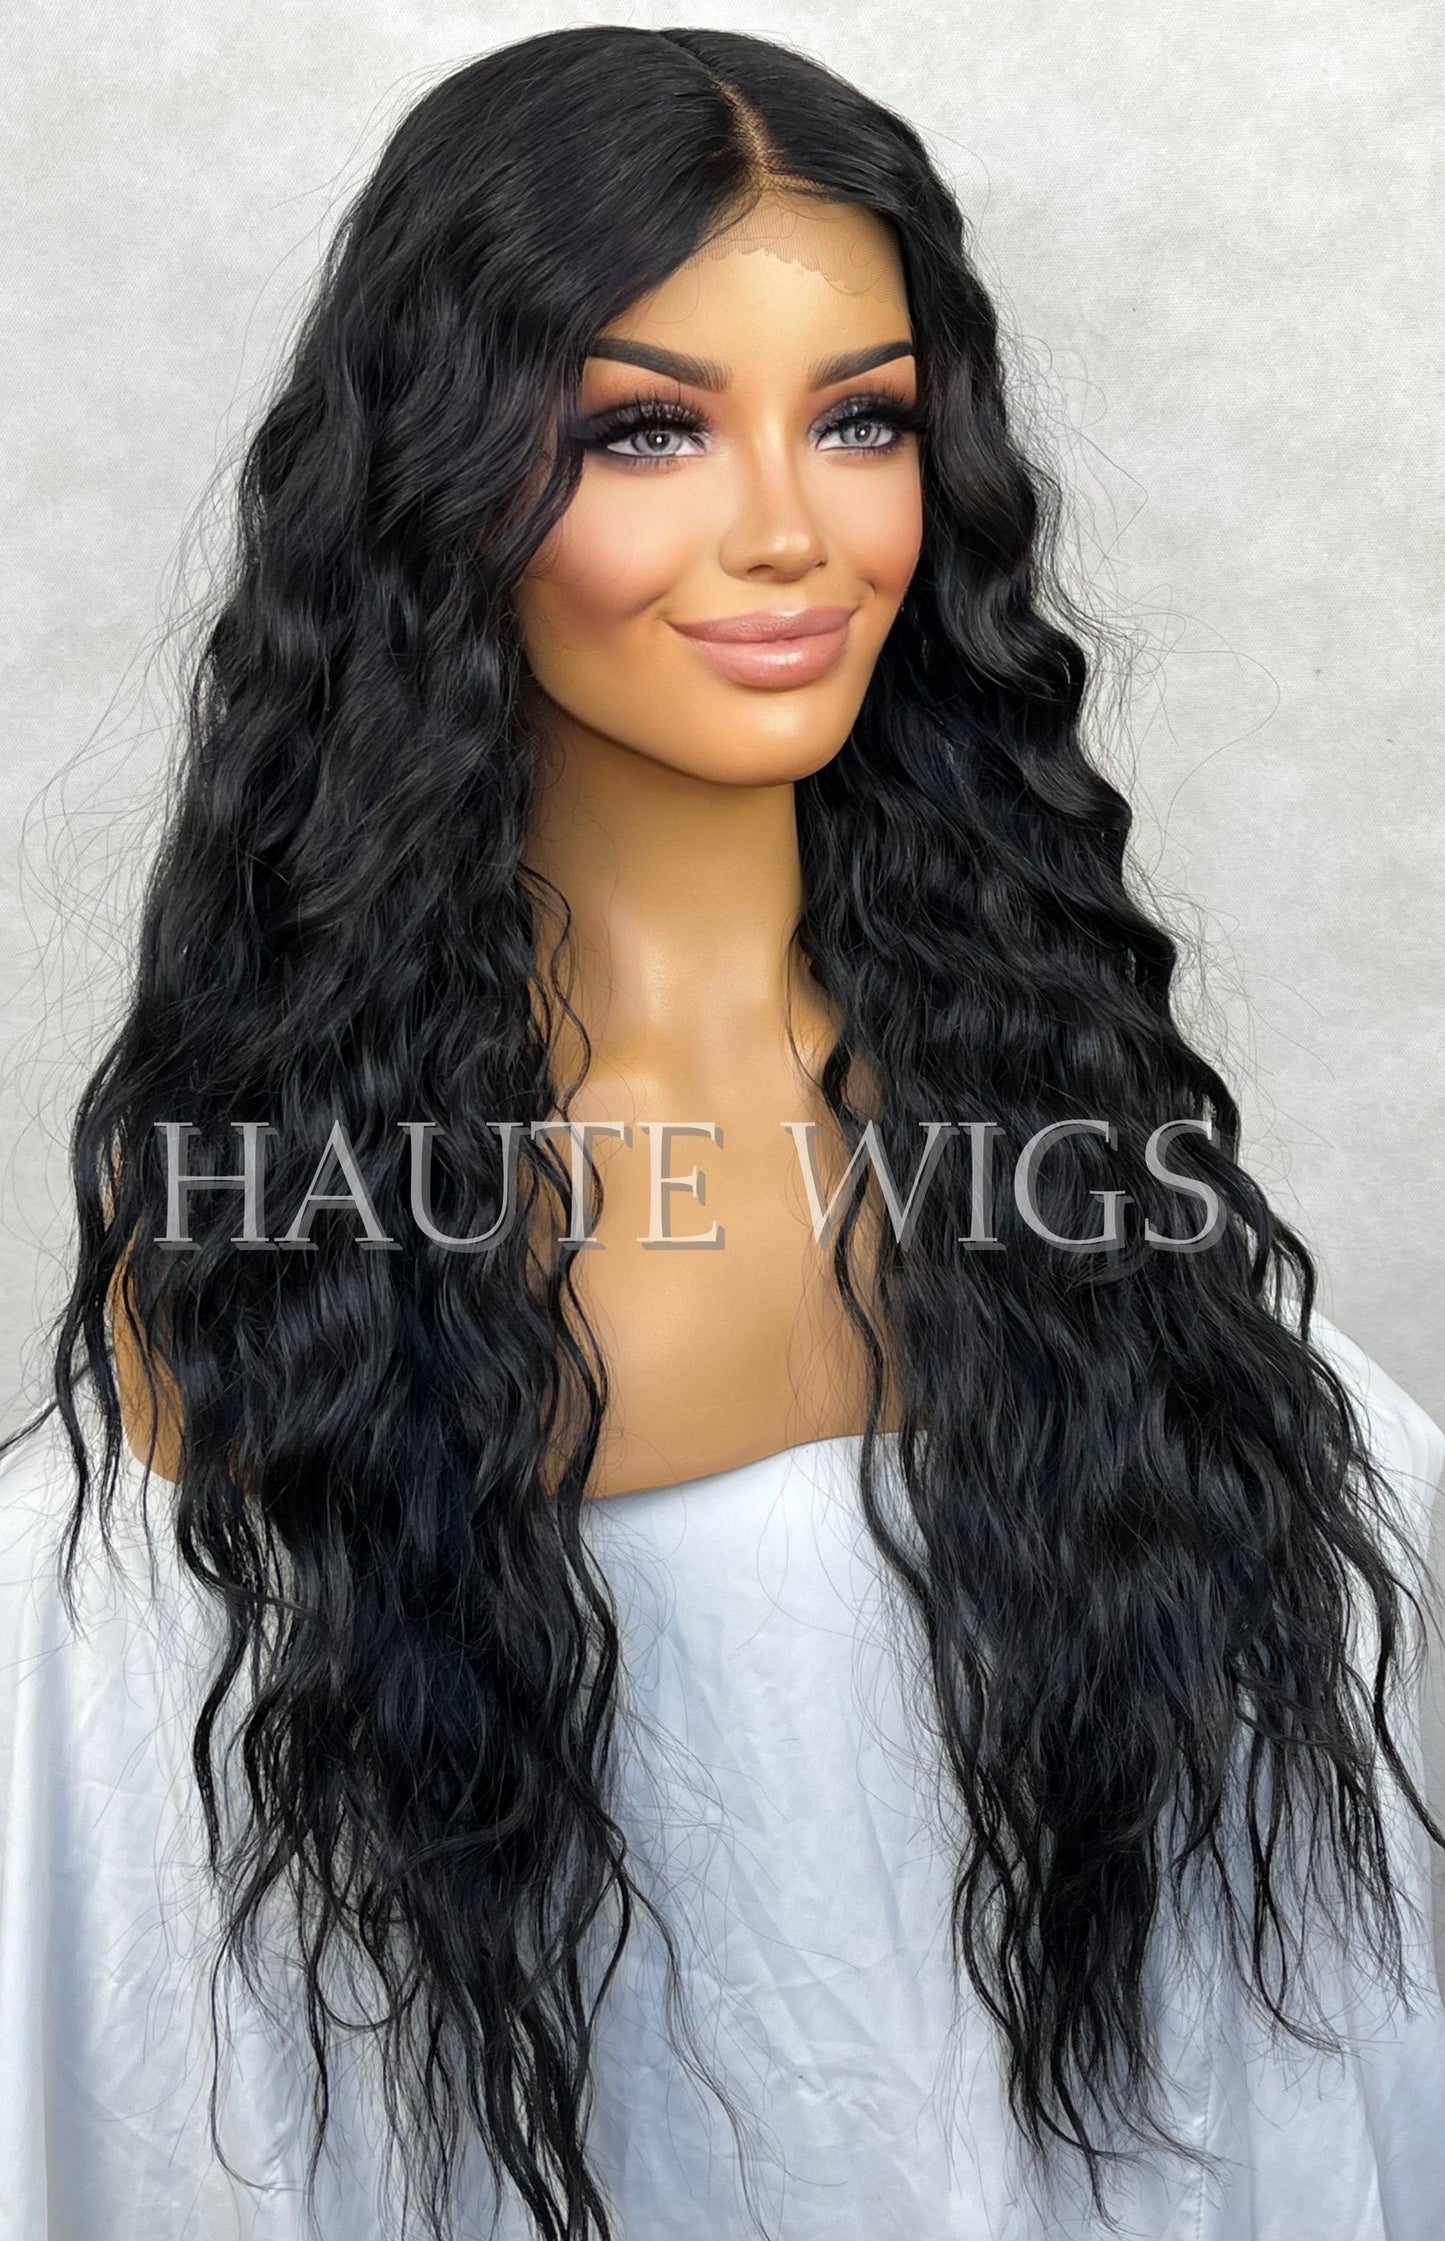 28 Inch Jet Black Curly Wavy Water Waves Wig Lace Front Perm Human Hair Blends Gift For Her Realistic Ladies Womens Wig